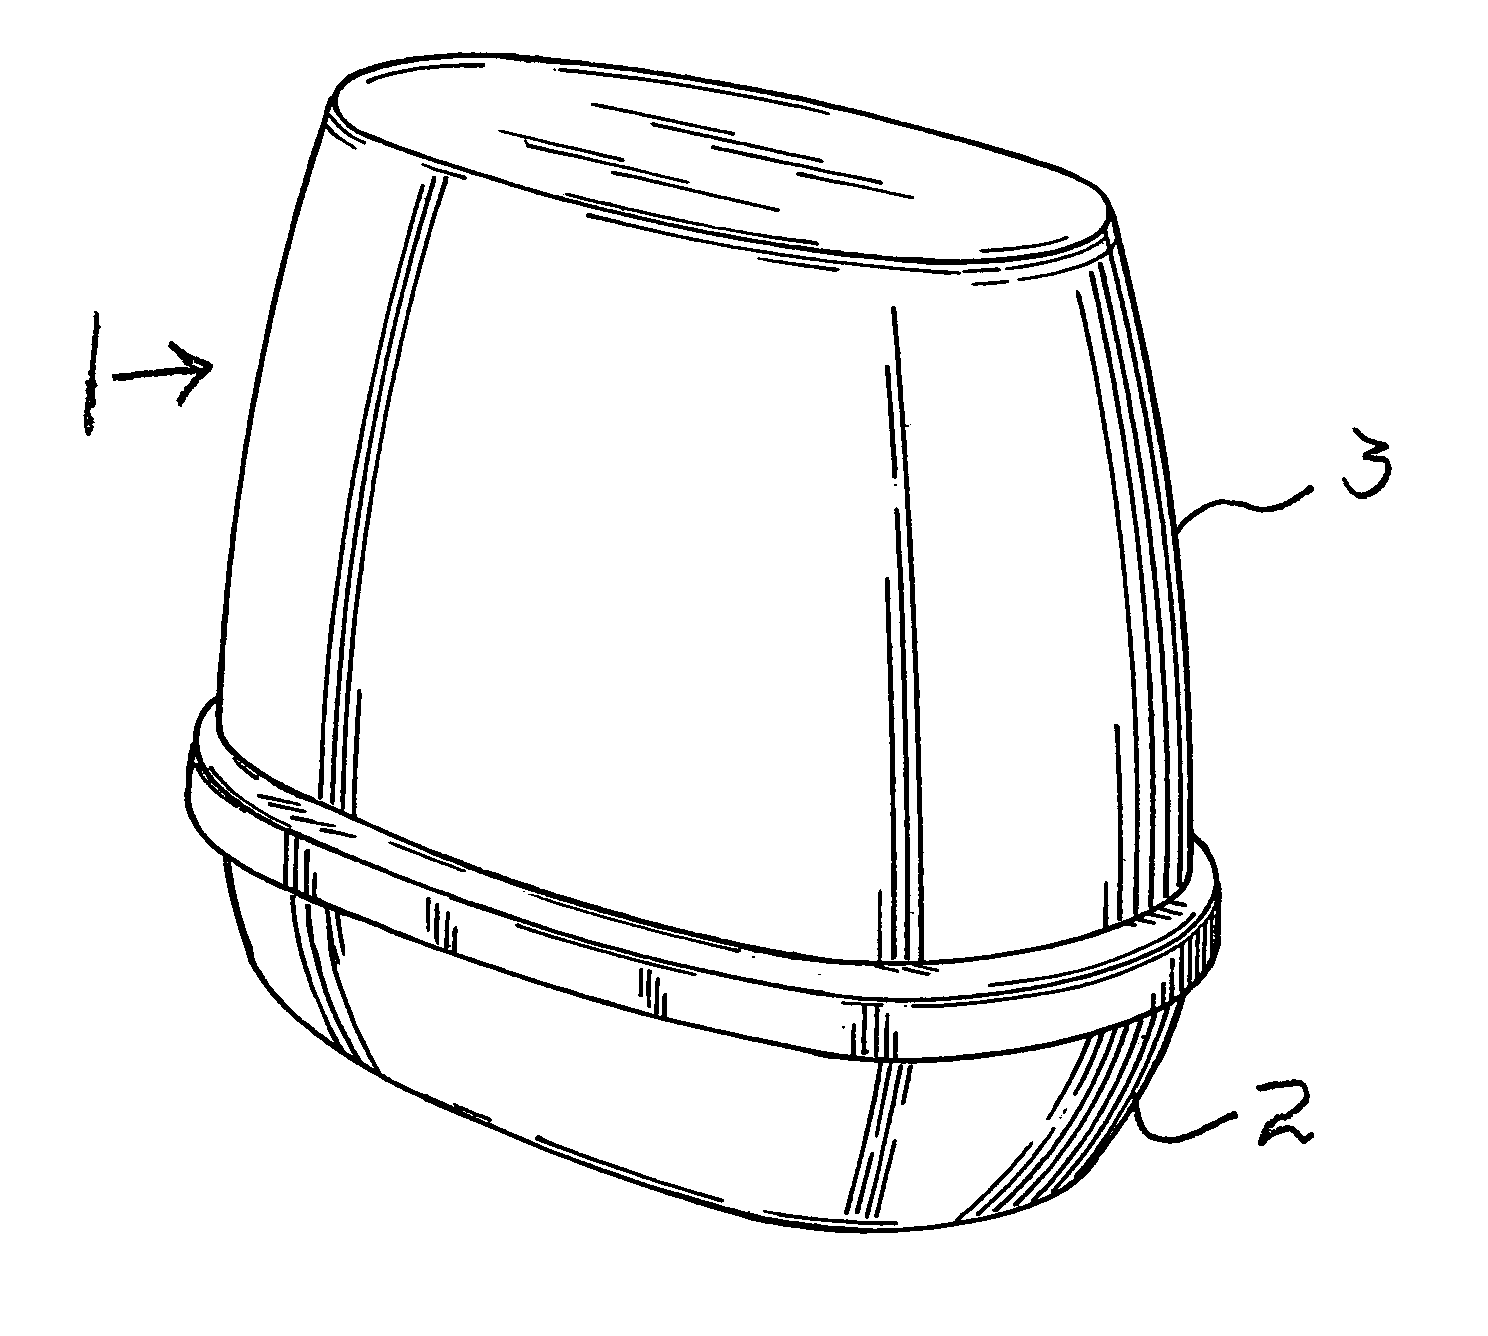 Open gel delivery device